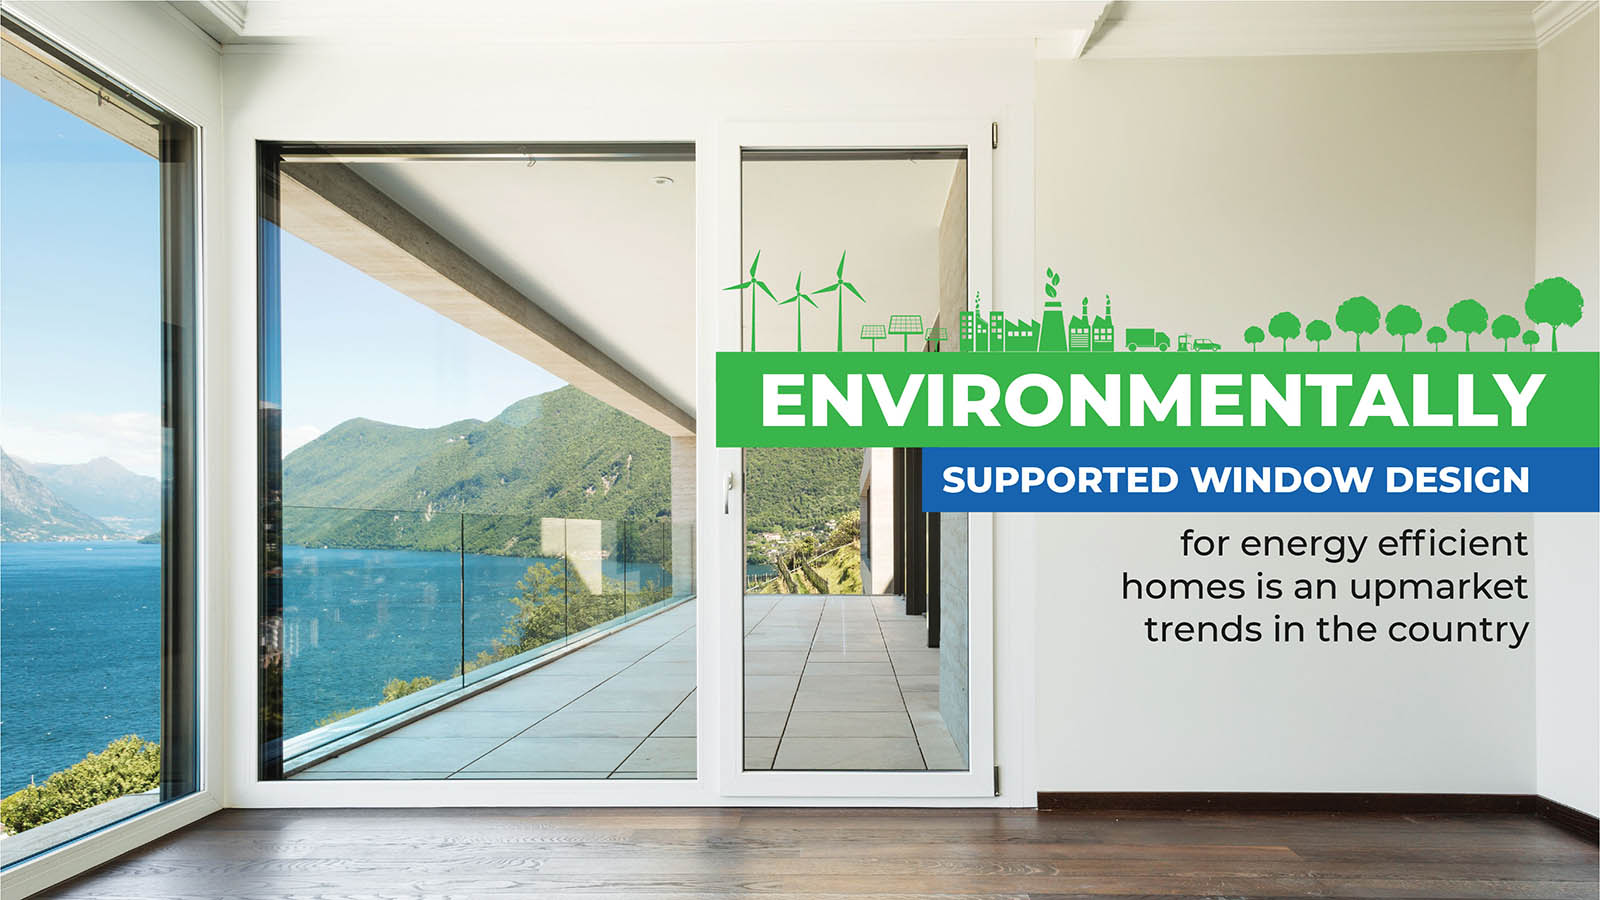 Environmentally supported window design for energy efficient homes is an upmarket trends in the country